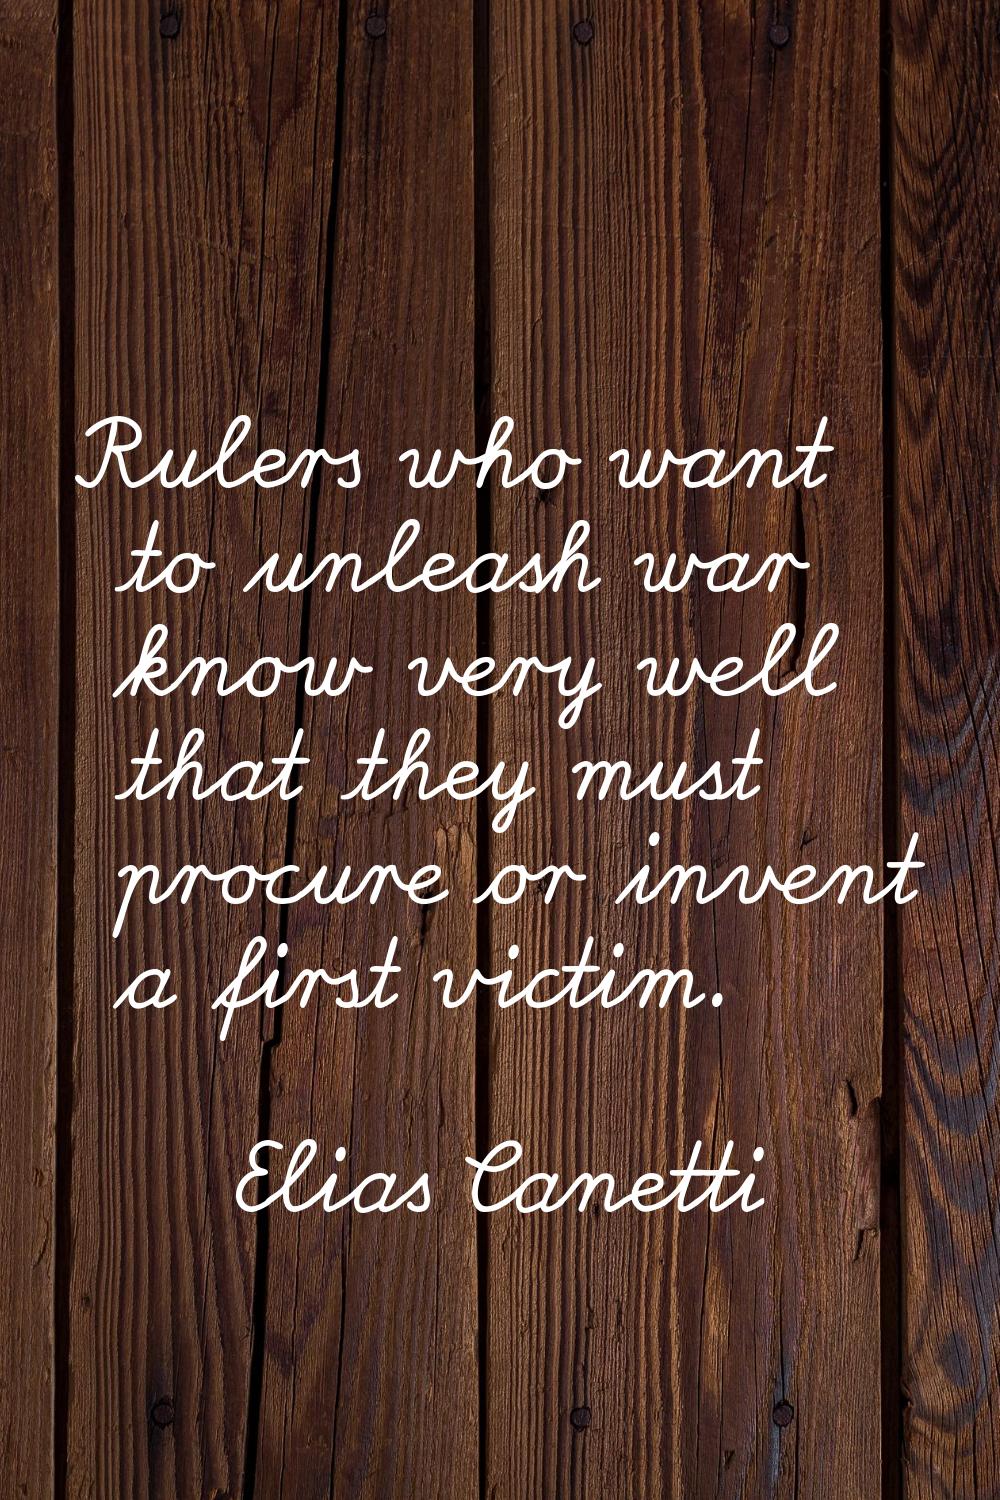 Rulers who want to unleash war know very well that they must procure or invent a first victim.